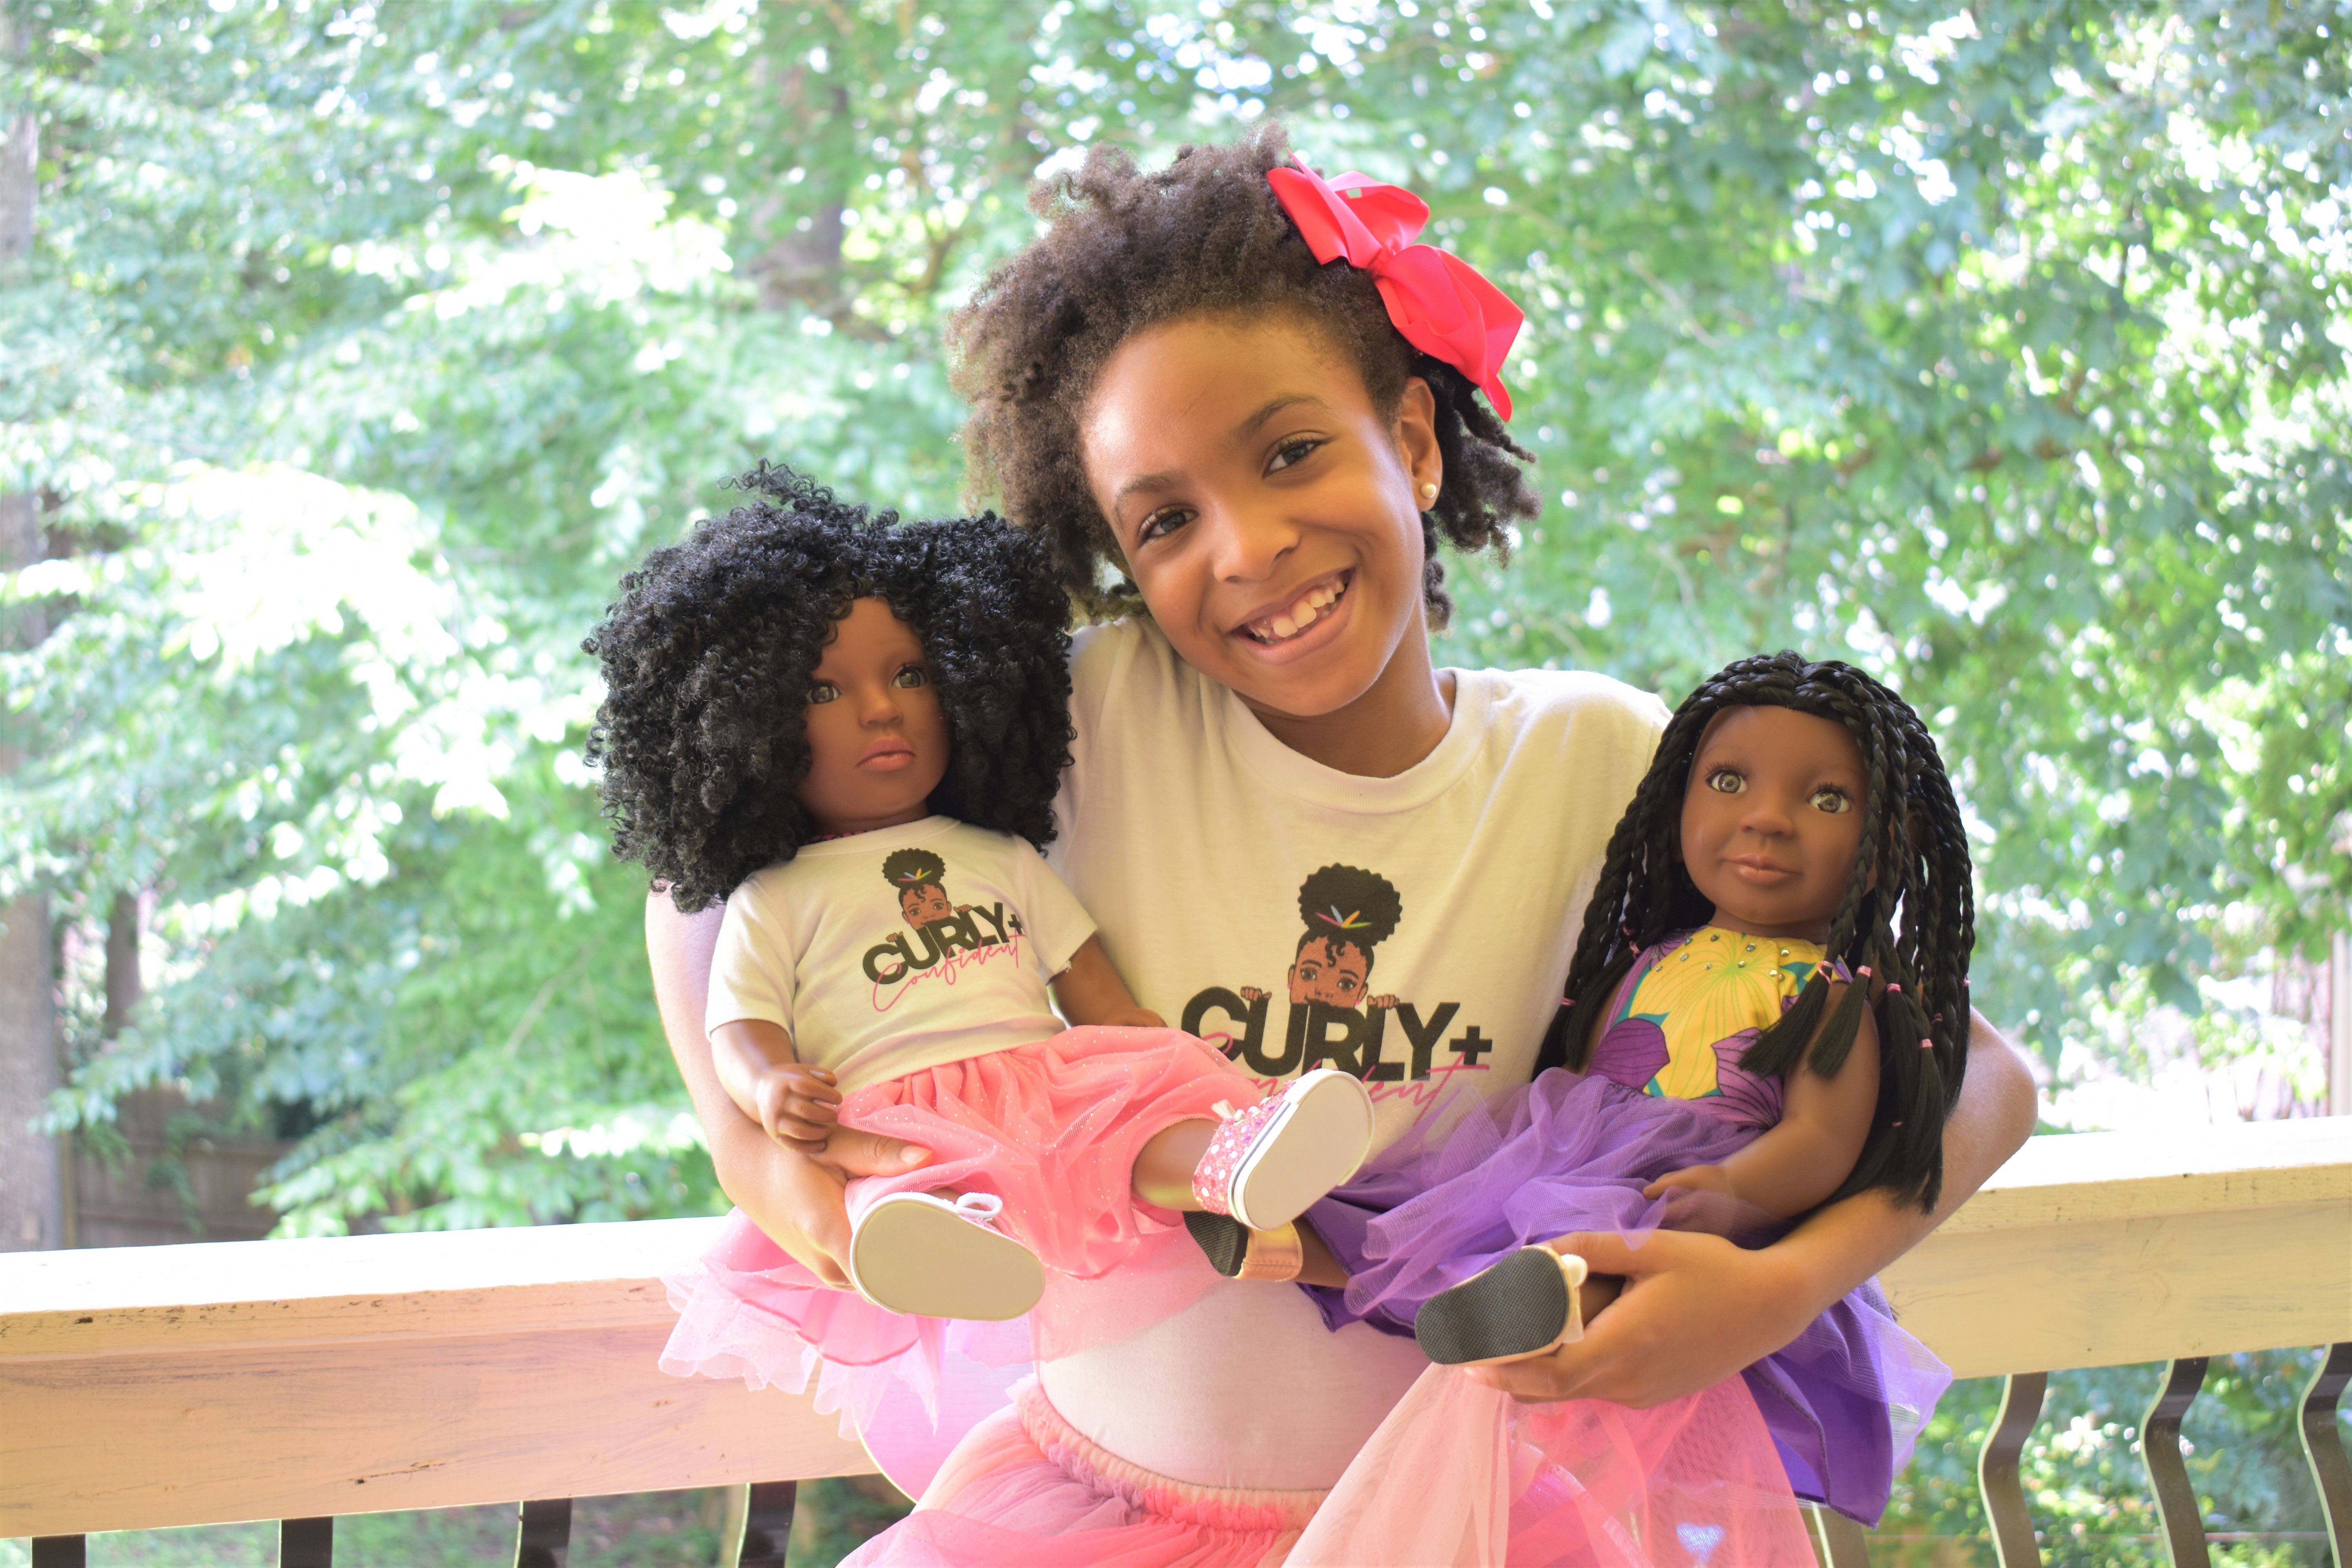 Mom creates black doll with natural hair for her daughter